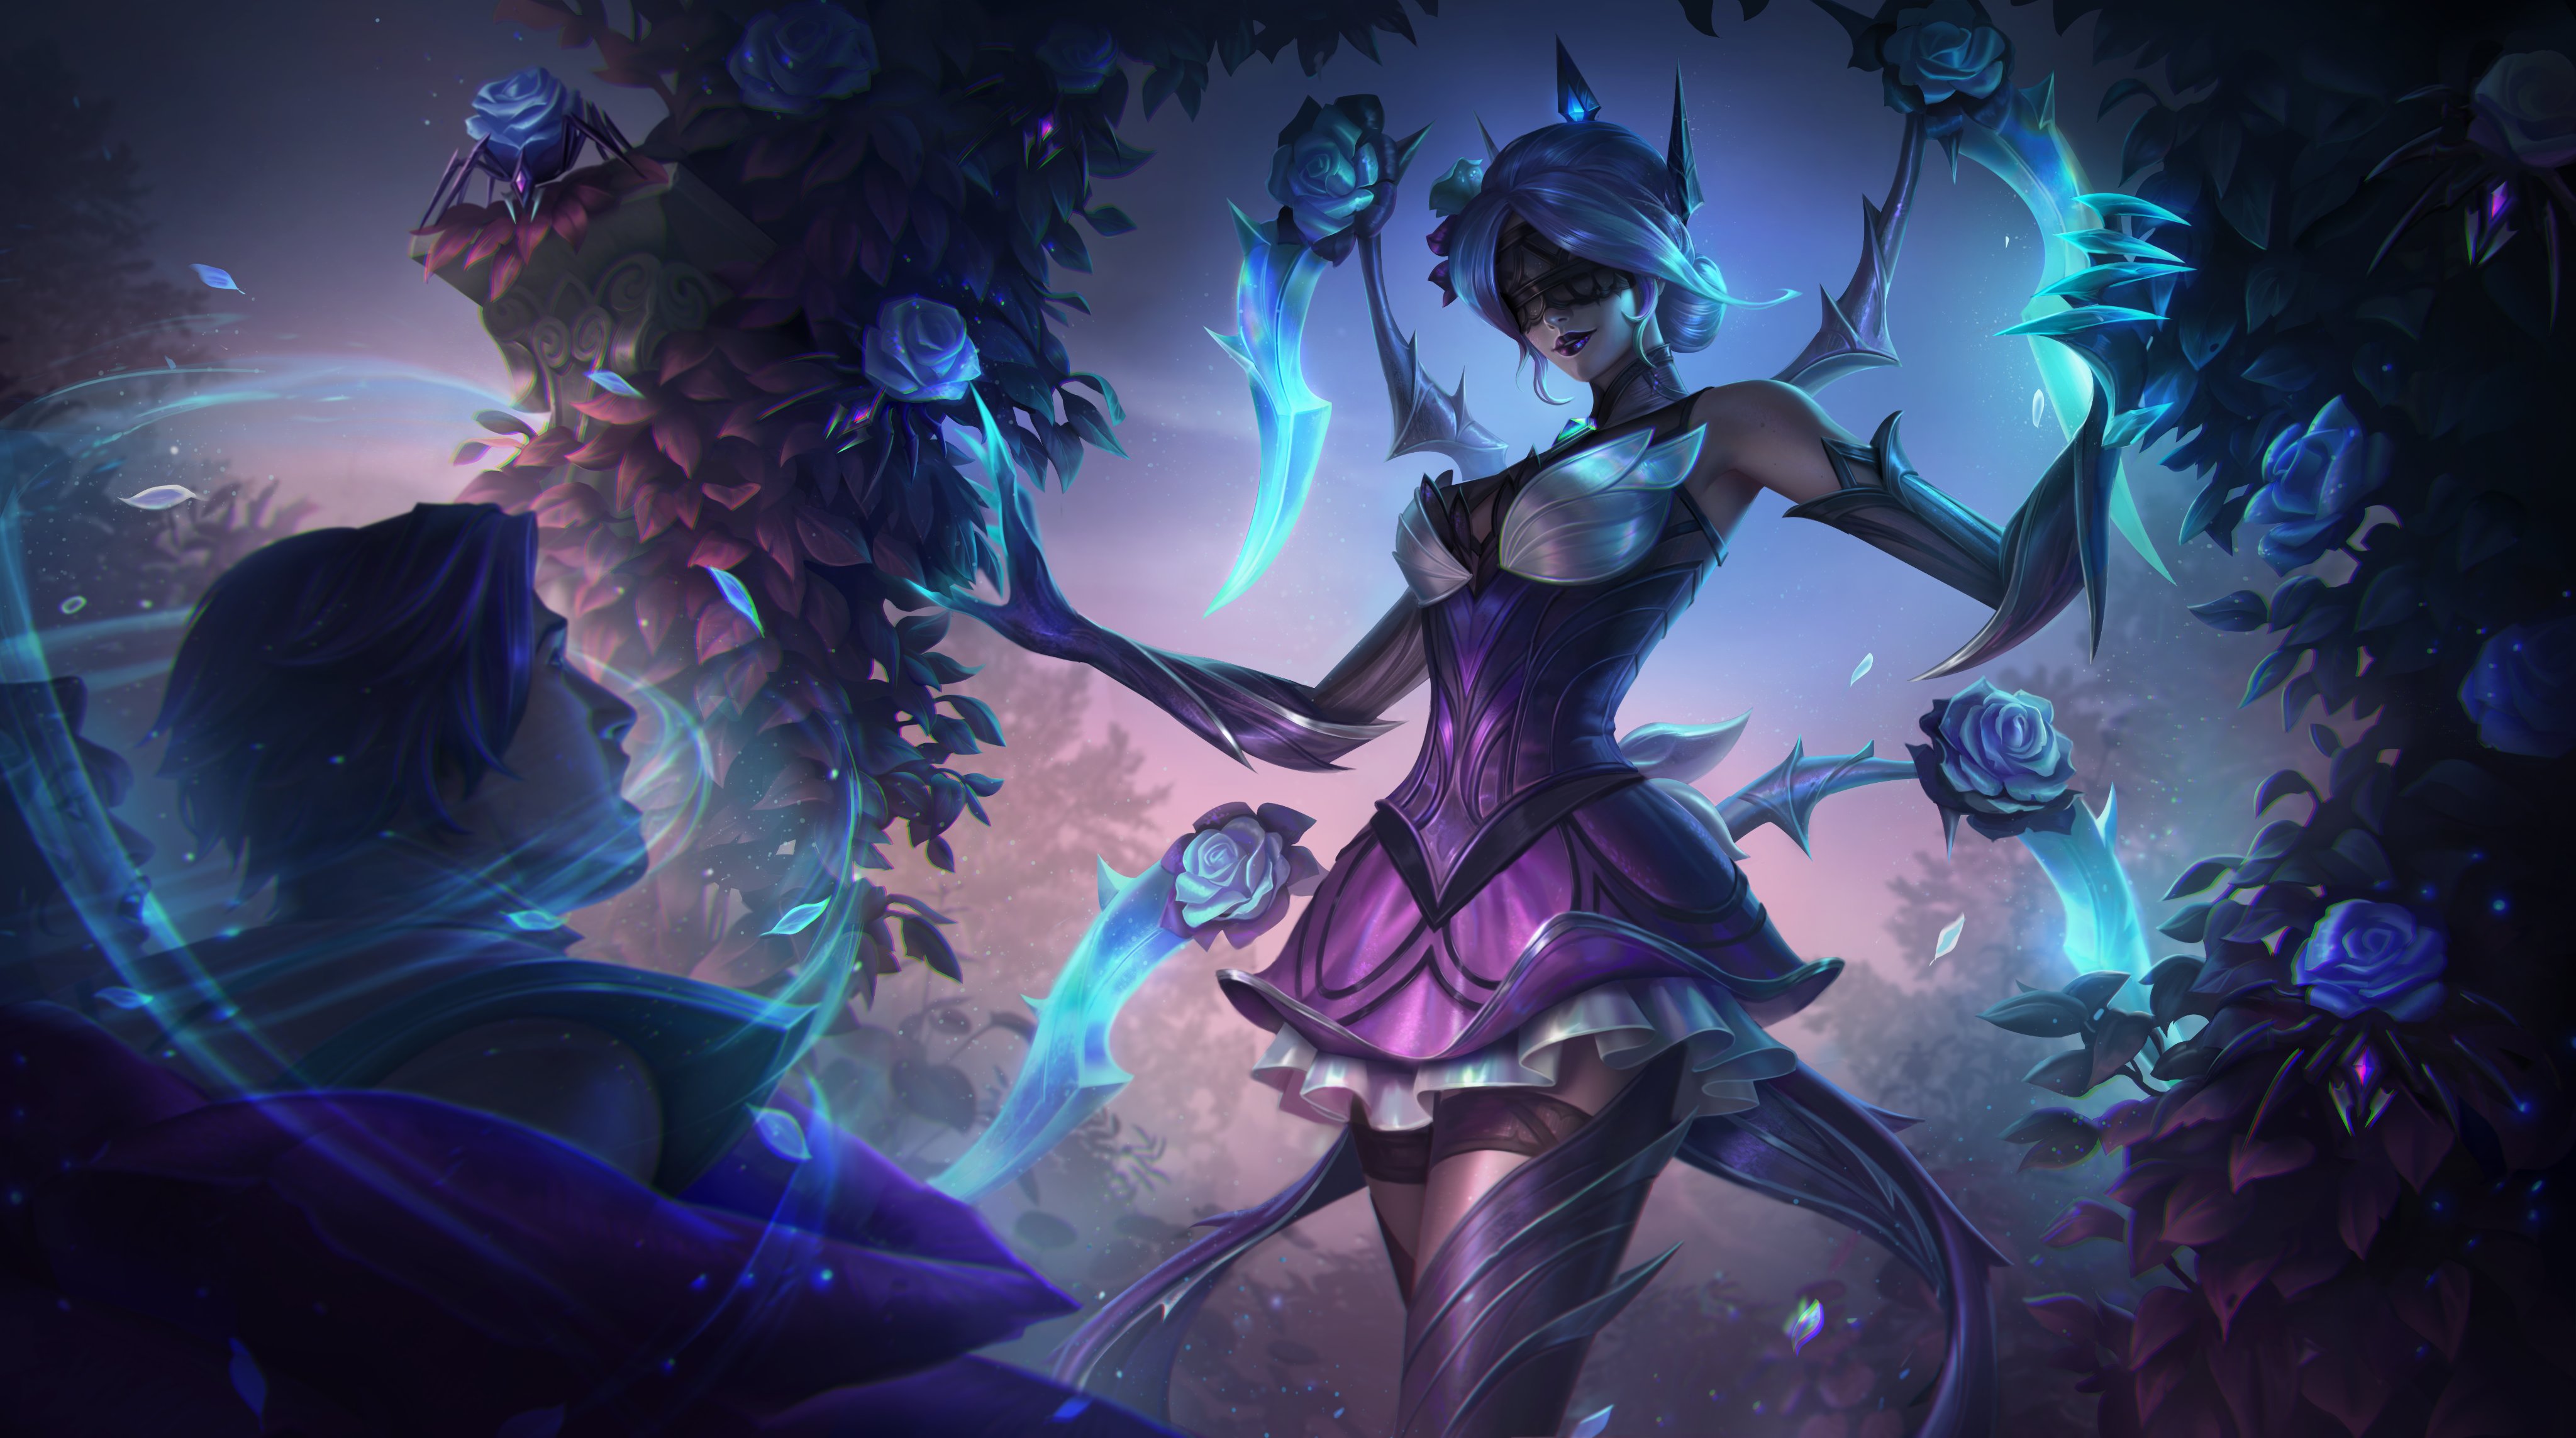 League of Legends Elise wallpaper Resolution 4096x2287 | Best Download this awesome wallpaper - Cool Wallpaper HD - CoolWallpaper-HD.com